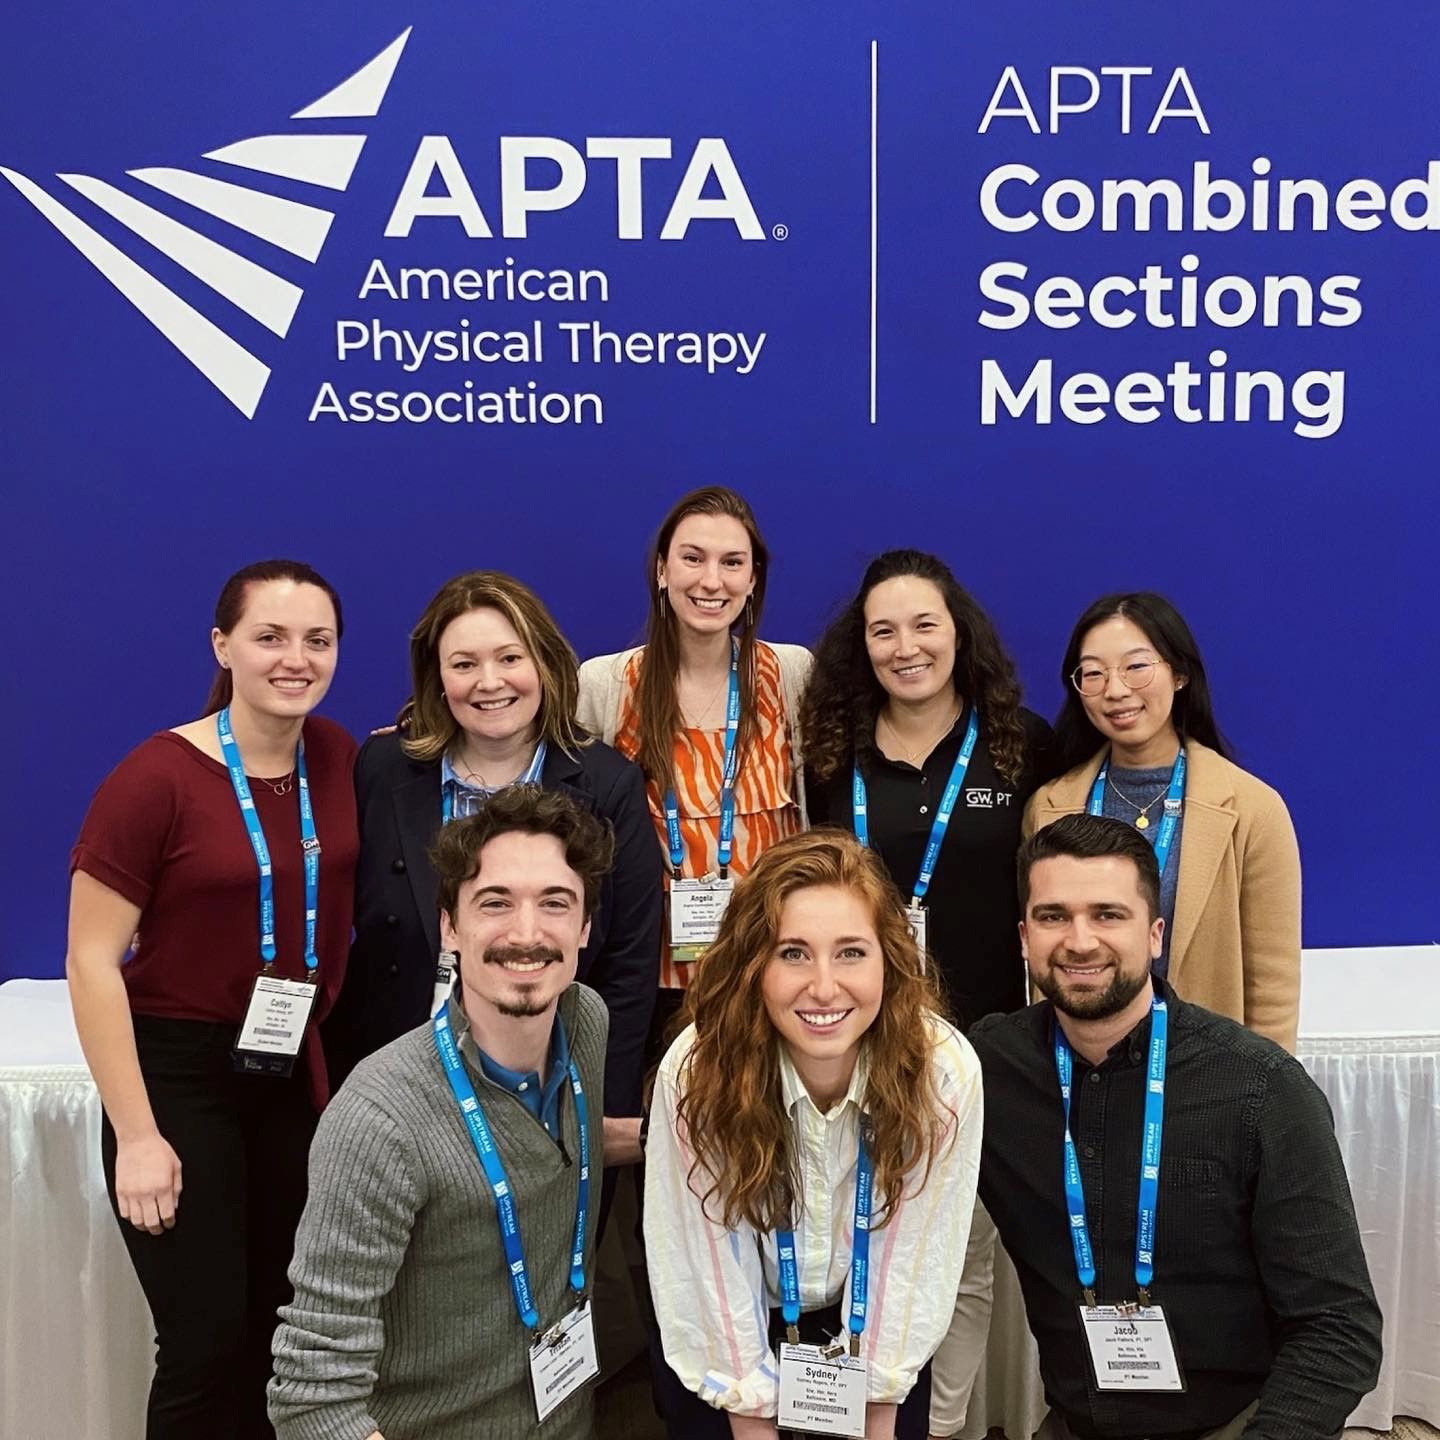 GW students and adjunct faculty pose in front of APTA CSM sign